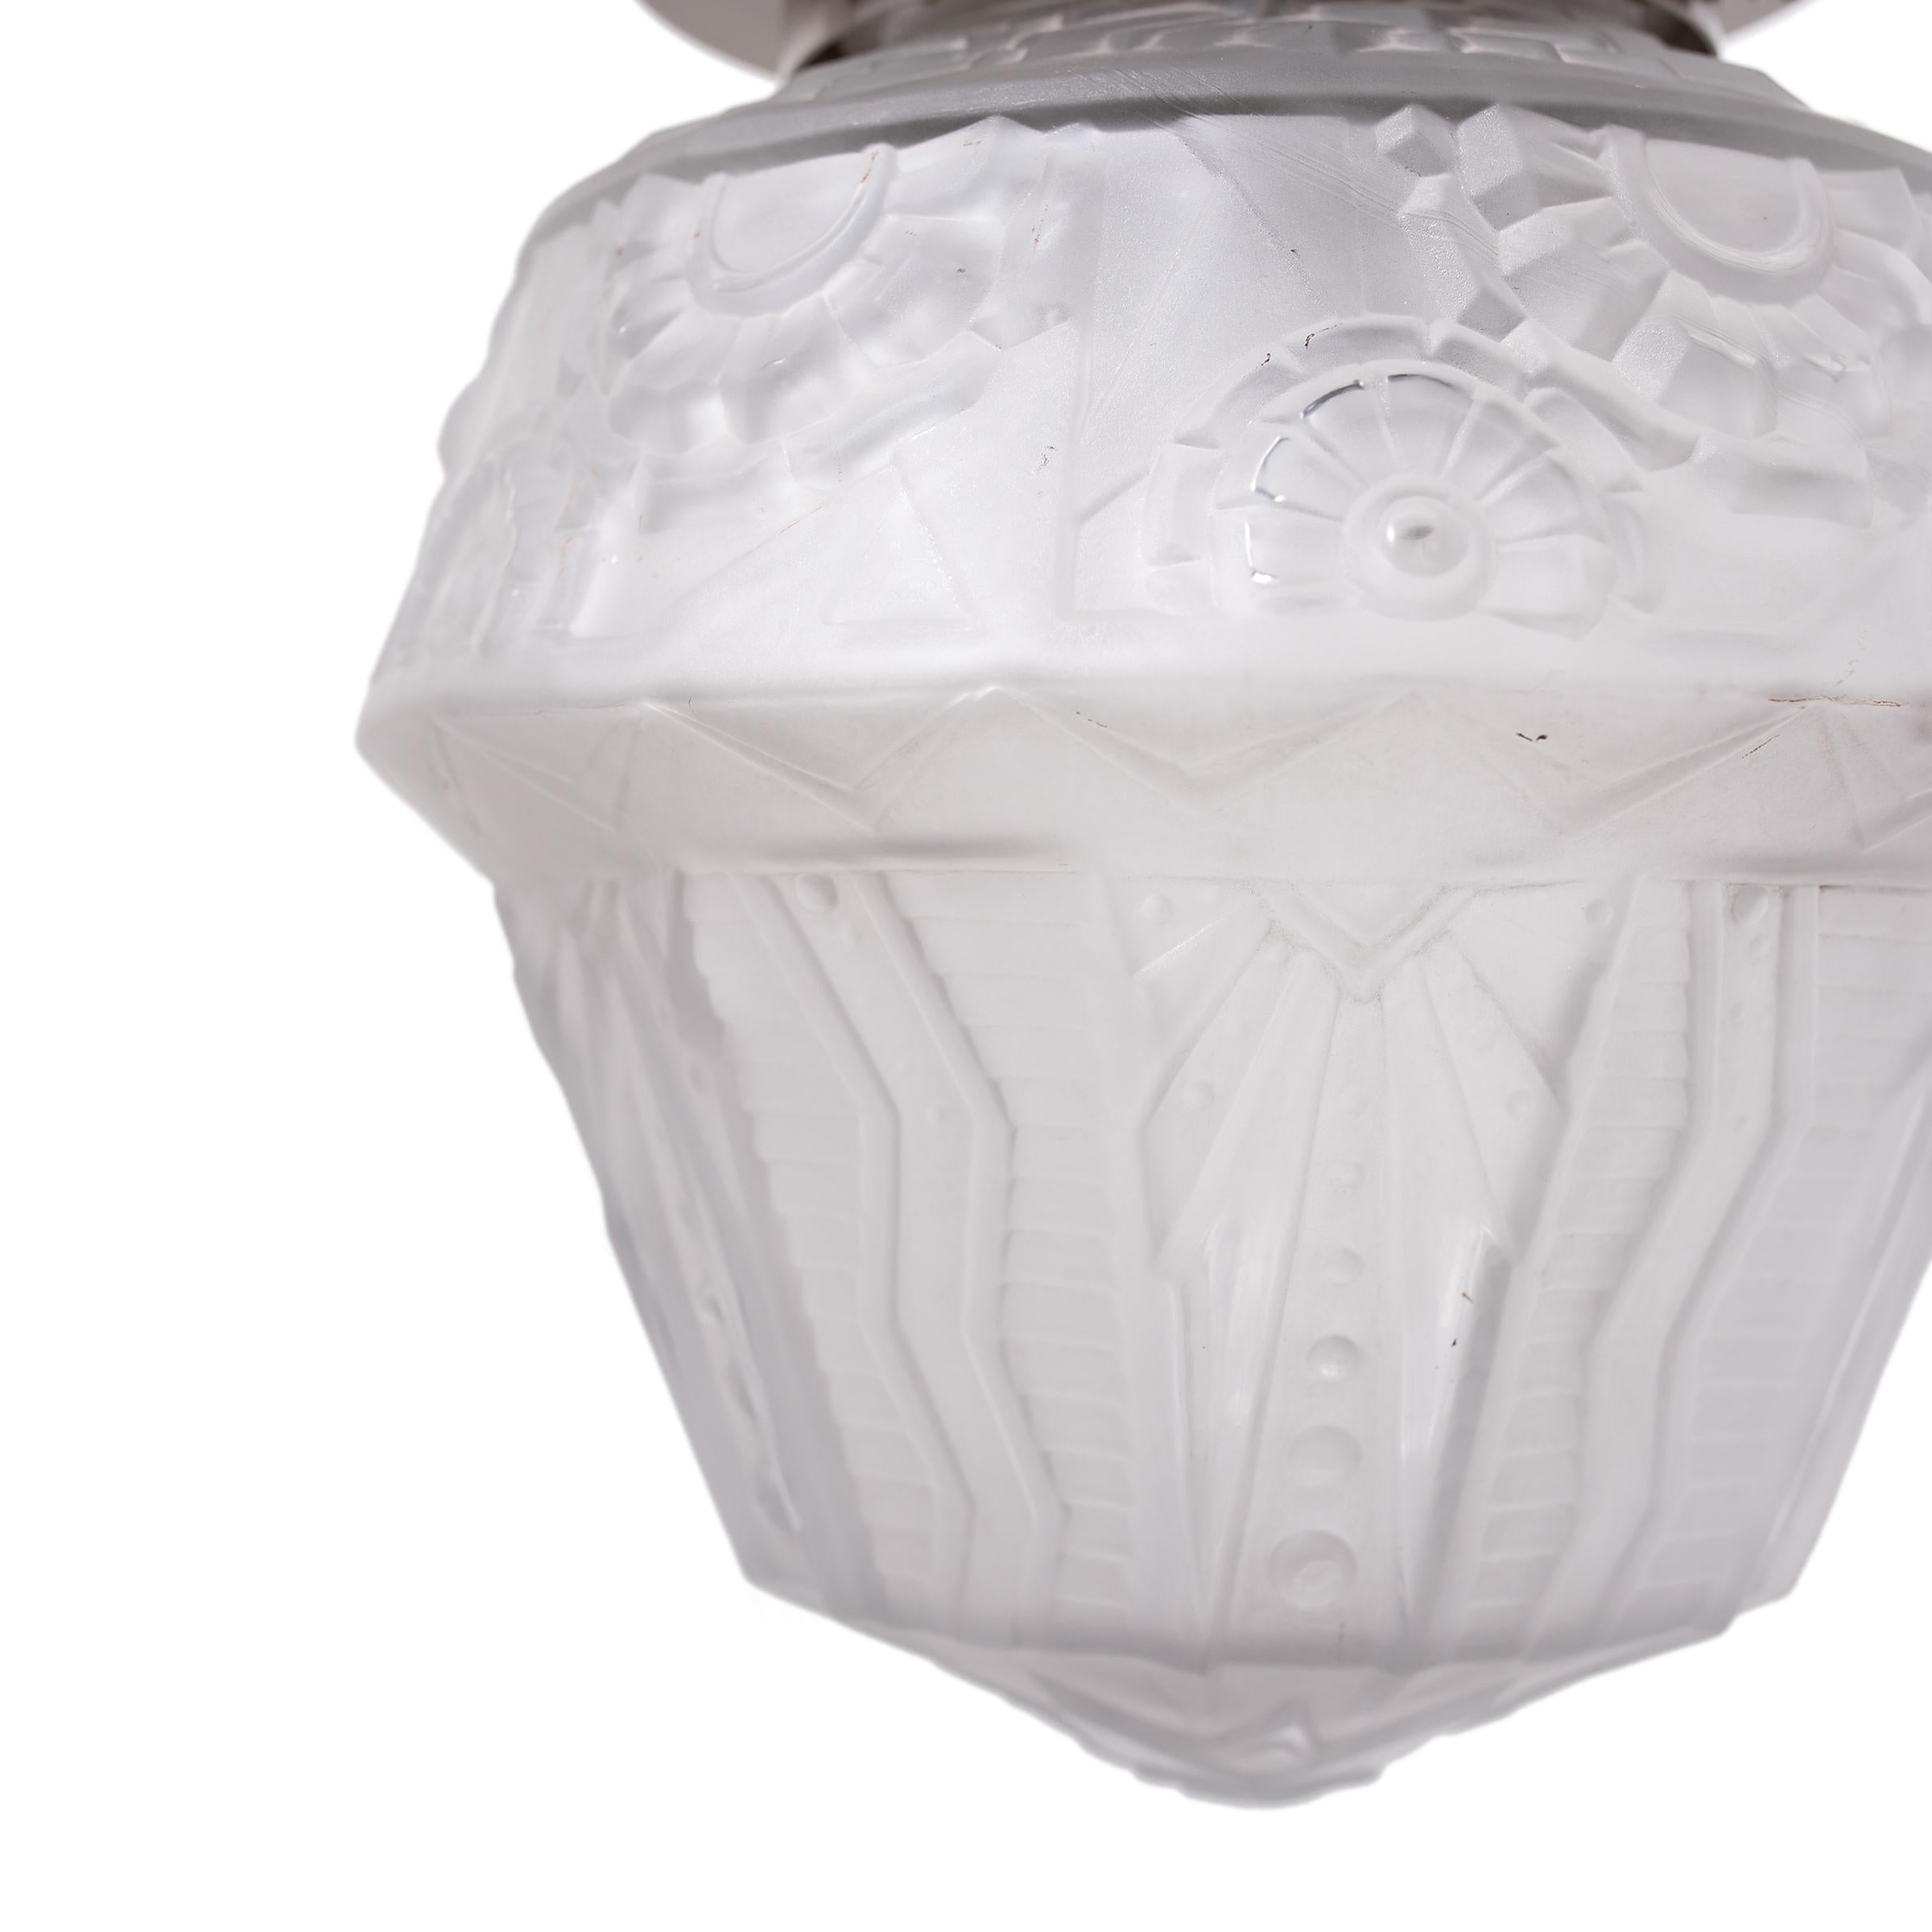 This early 20th century flush mount light fixture exemplifies French Art Deco lighting with its sculptural form and soft, delicate appearance. The ceiling light features a simple round flush mount and a frosted molded-glass shade shaped with